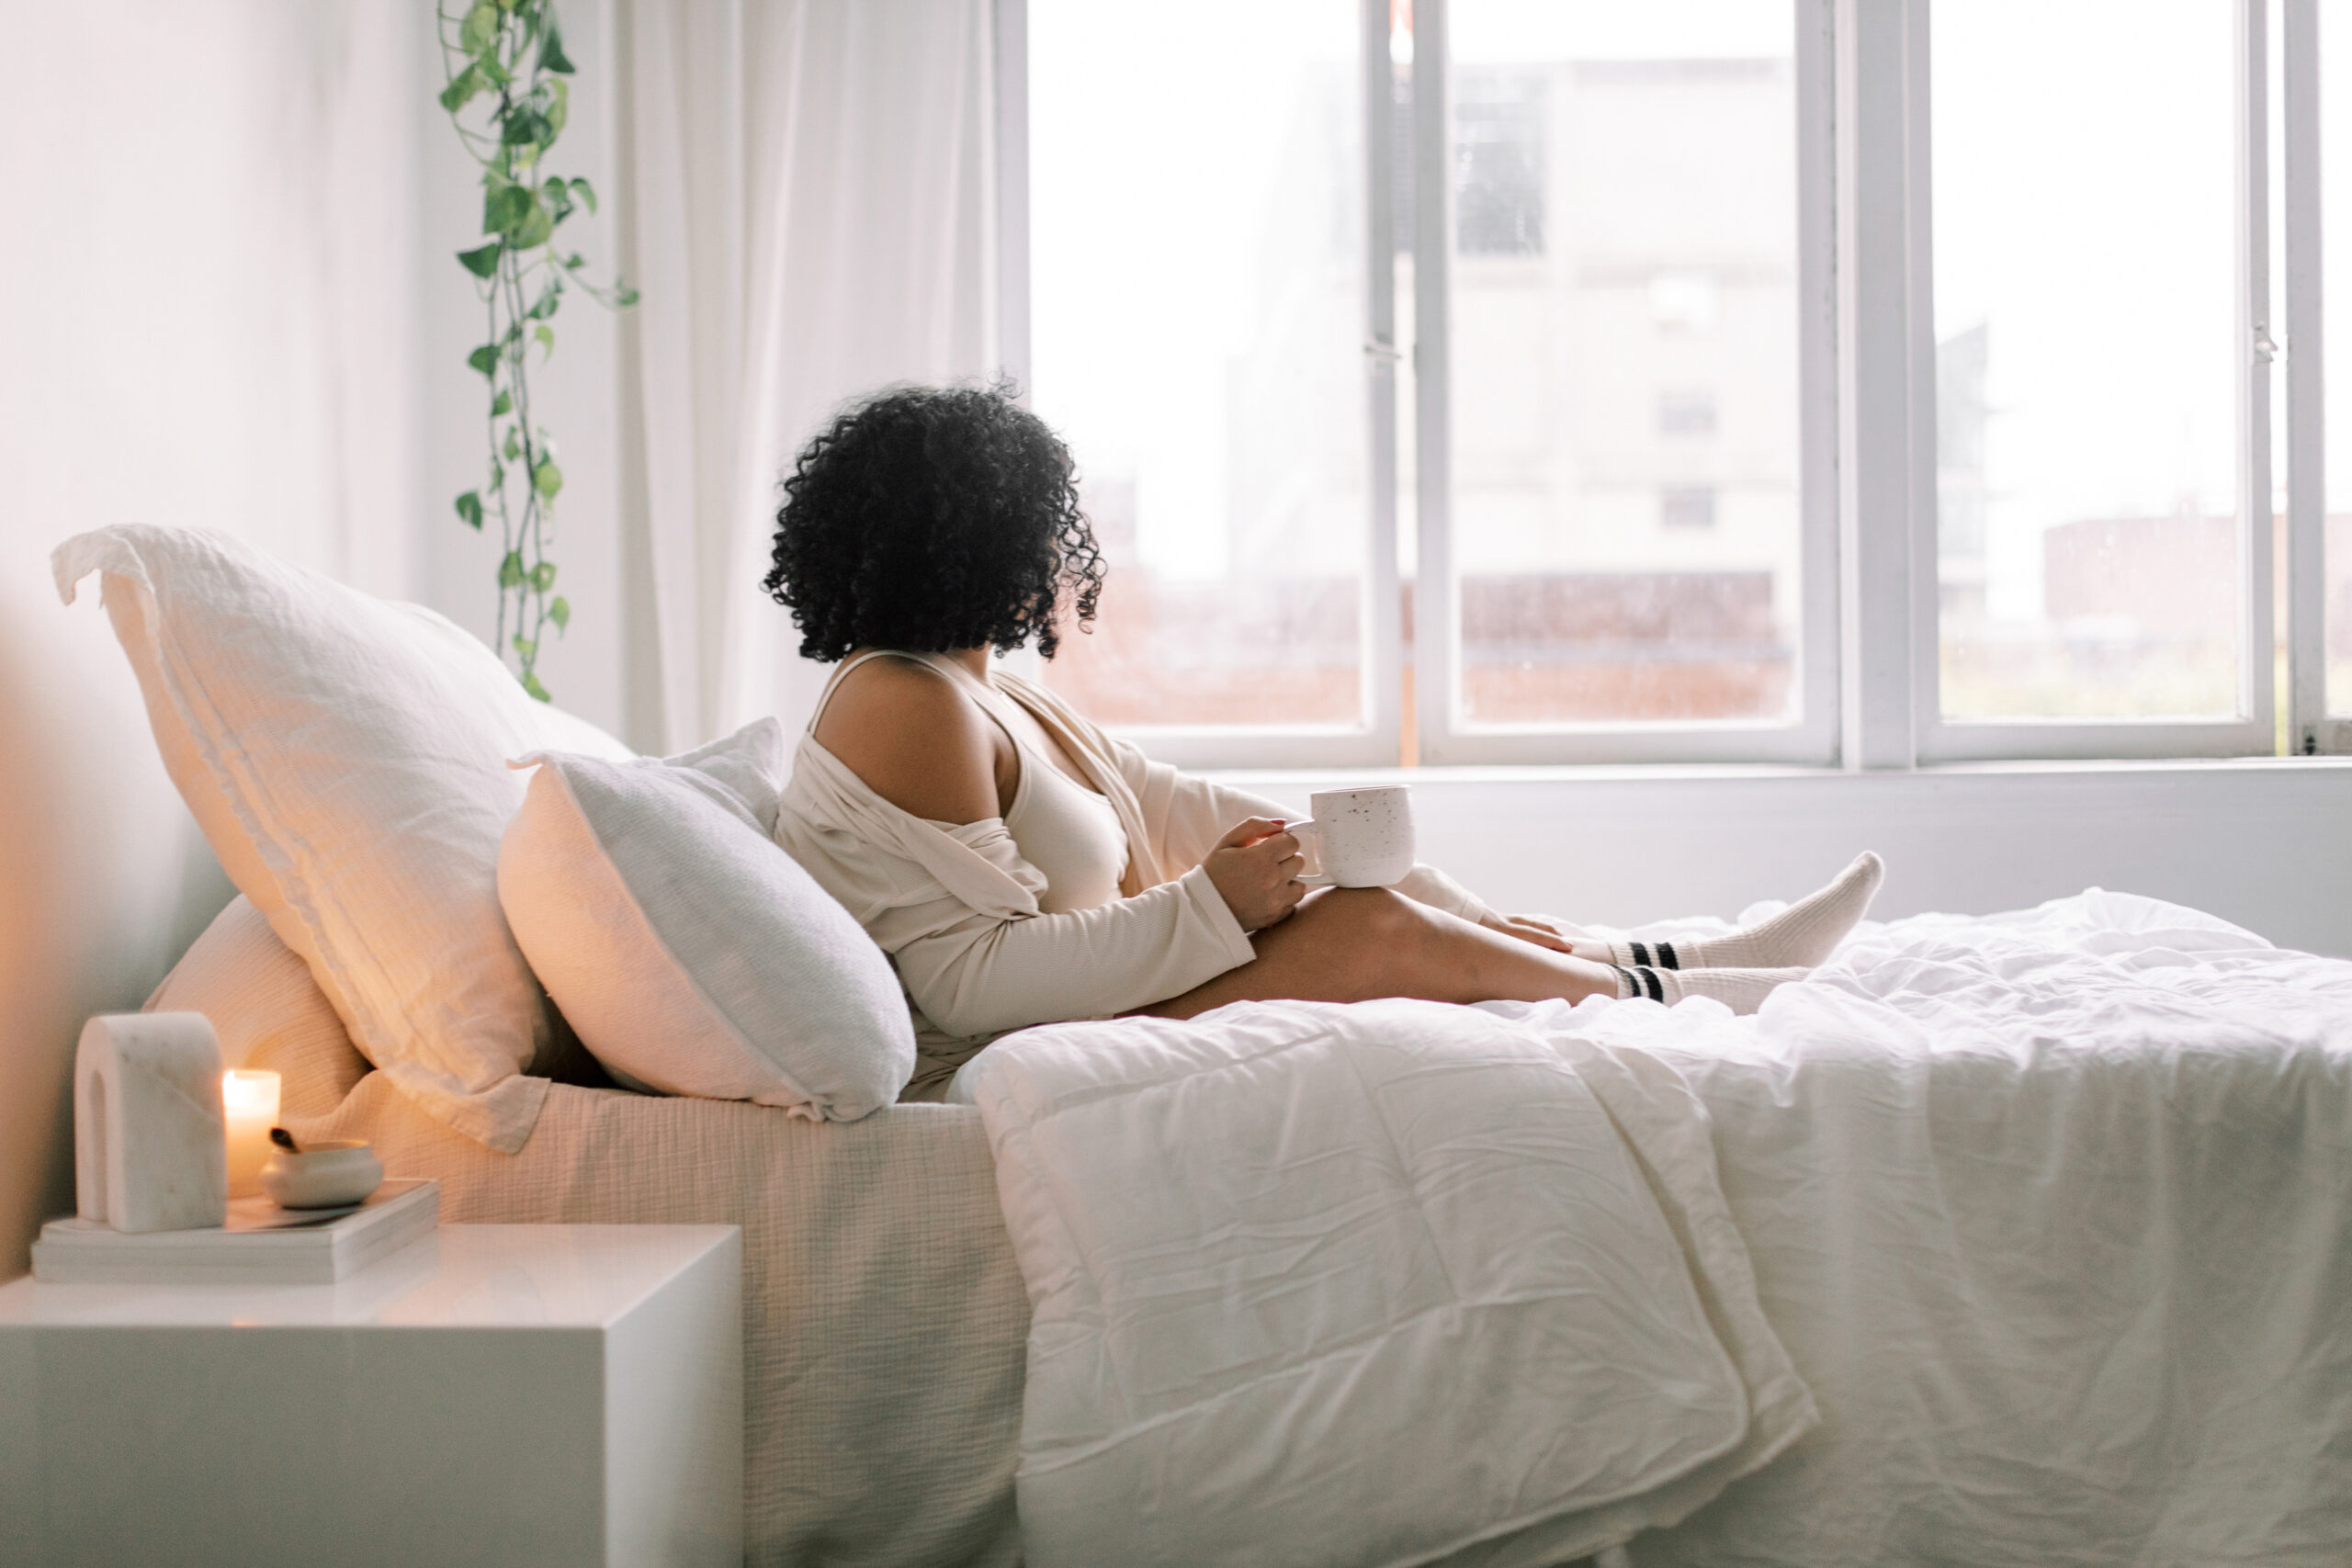 How to handle bad body image days. Woman sat on bed looking out a window.